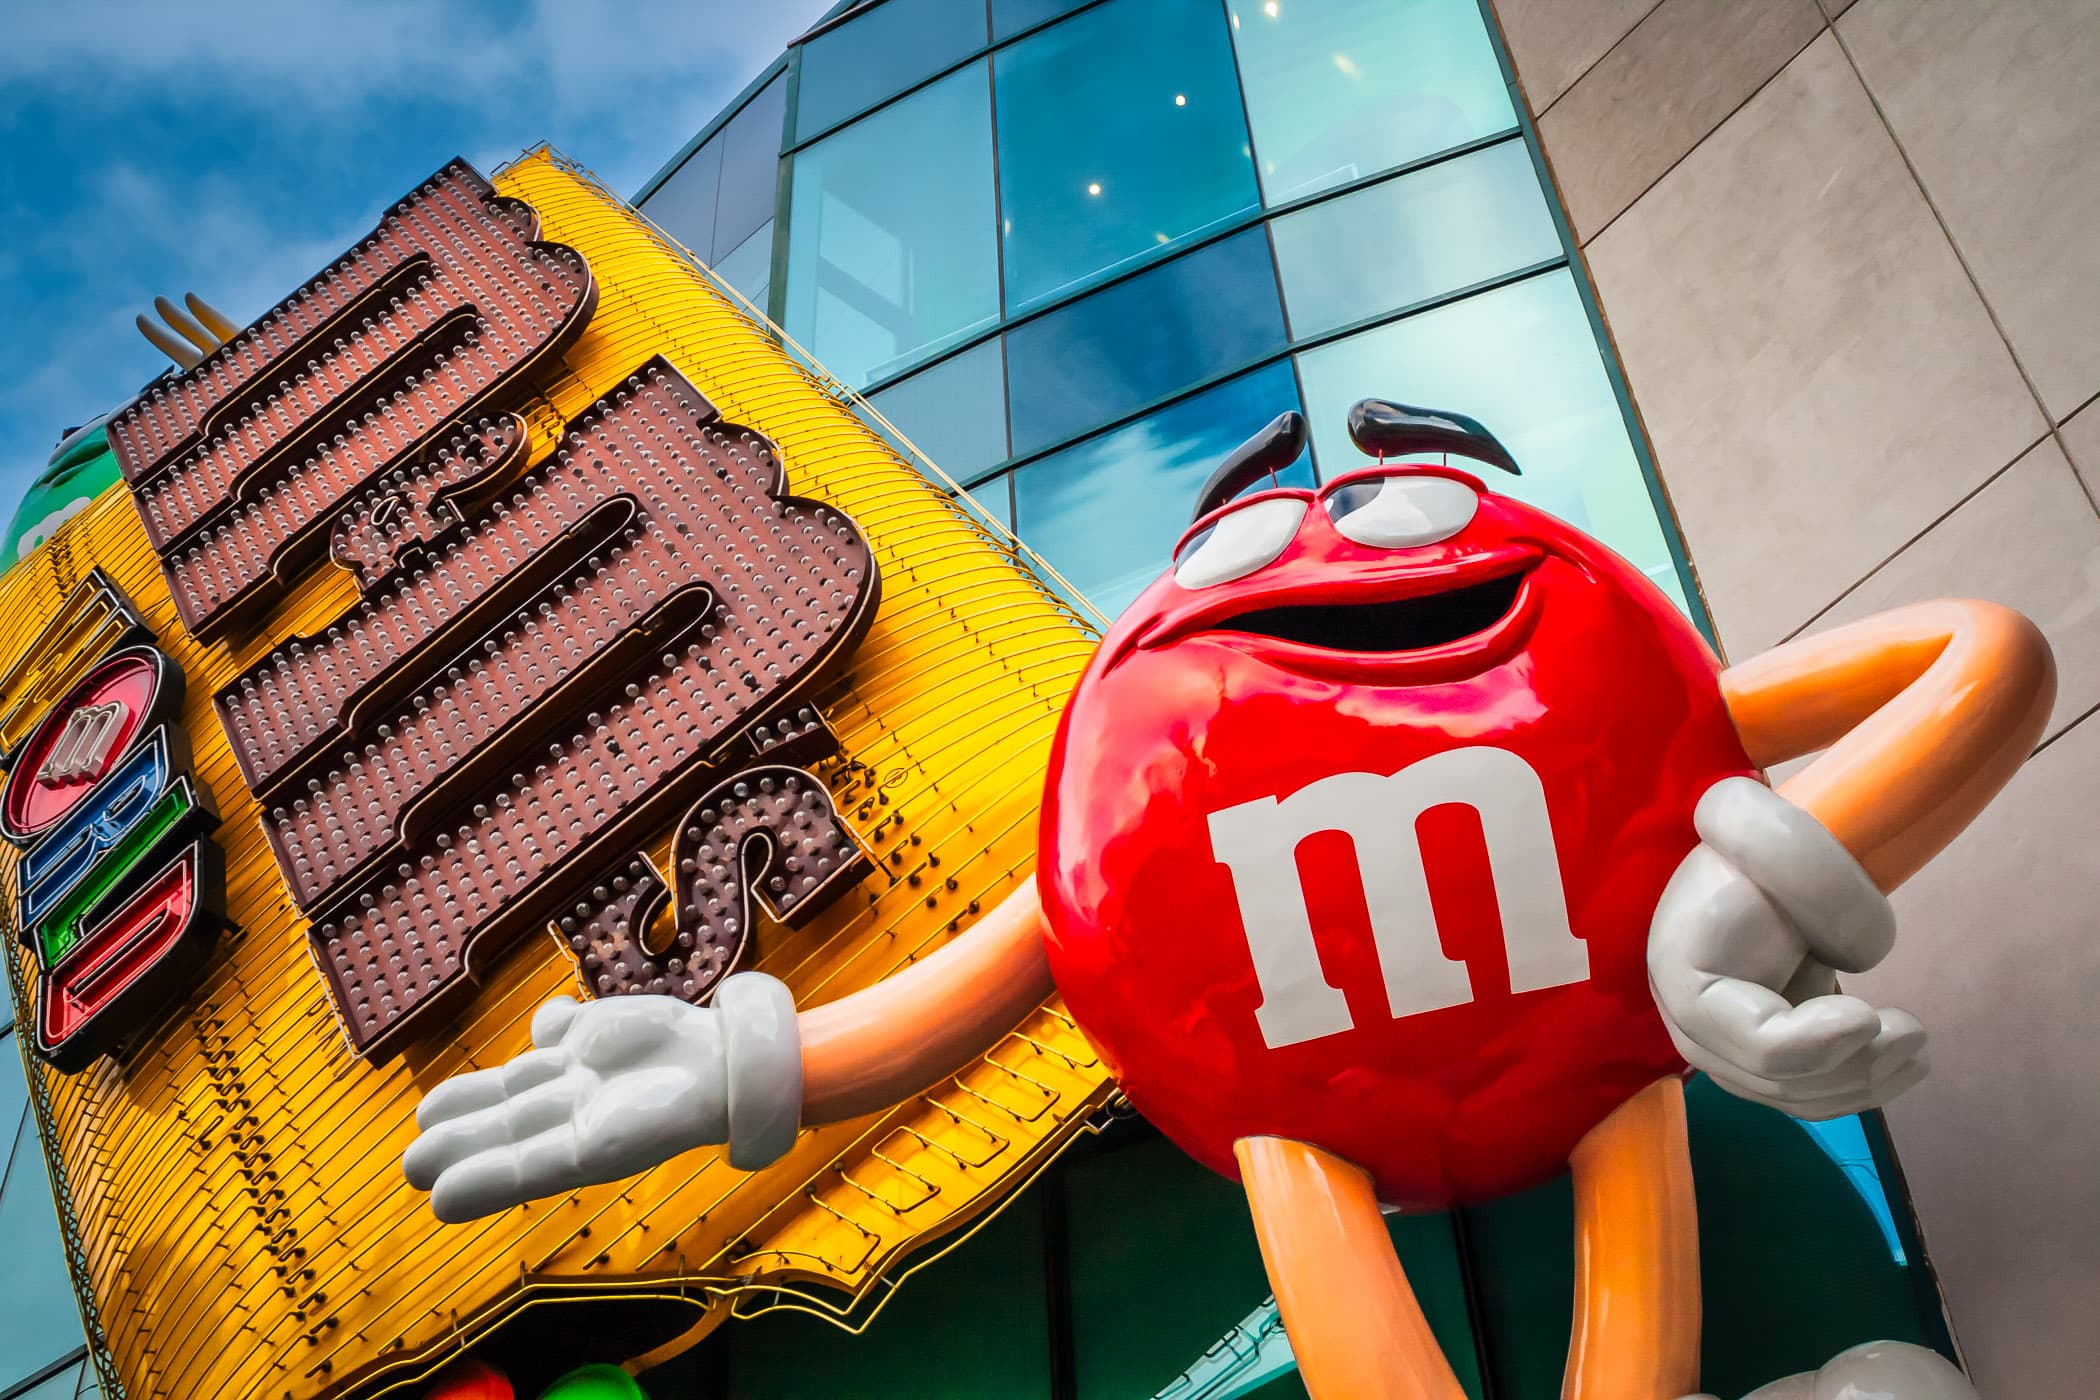 A giant anthropomorphic M&M welcomes visitors to the M&M's World in Las Vegas.